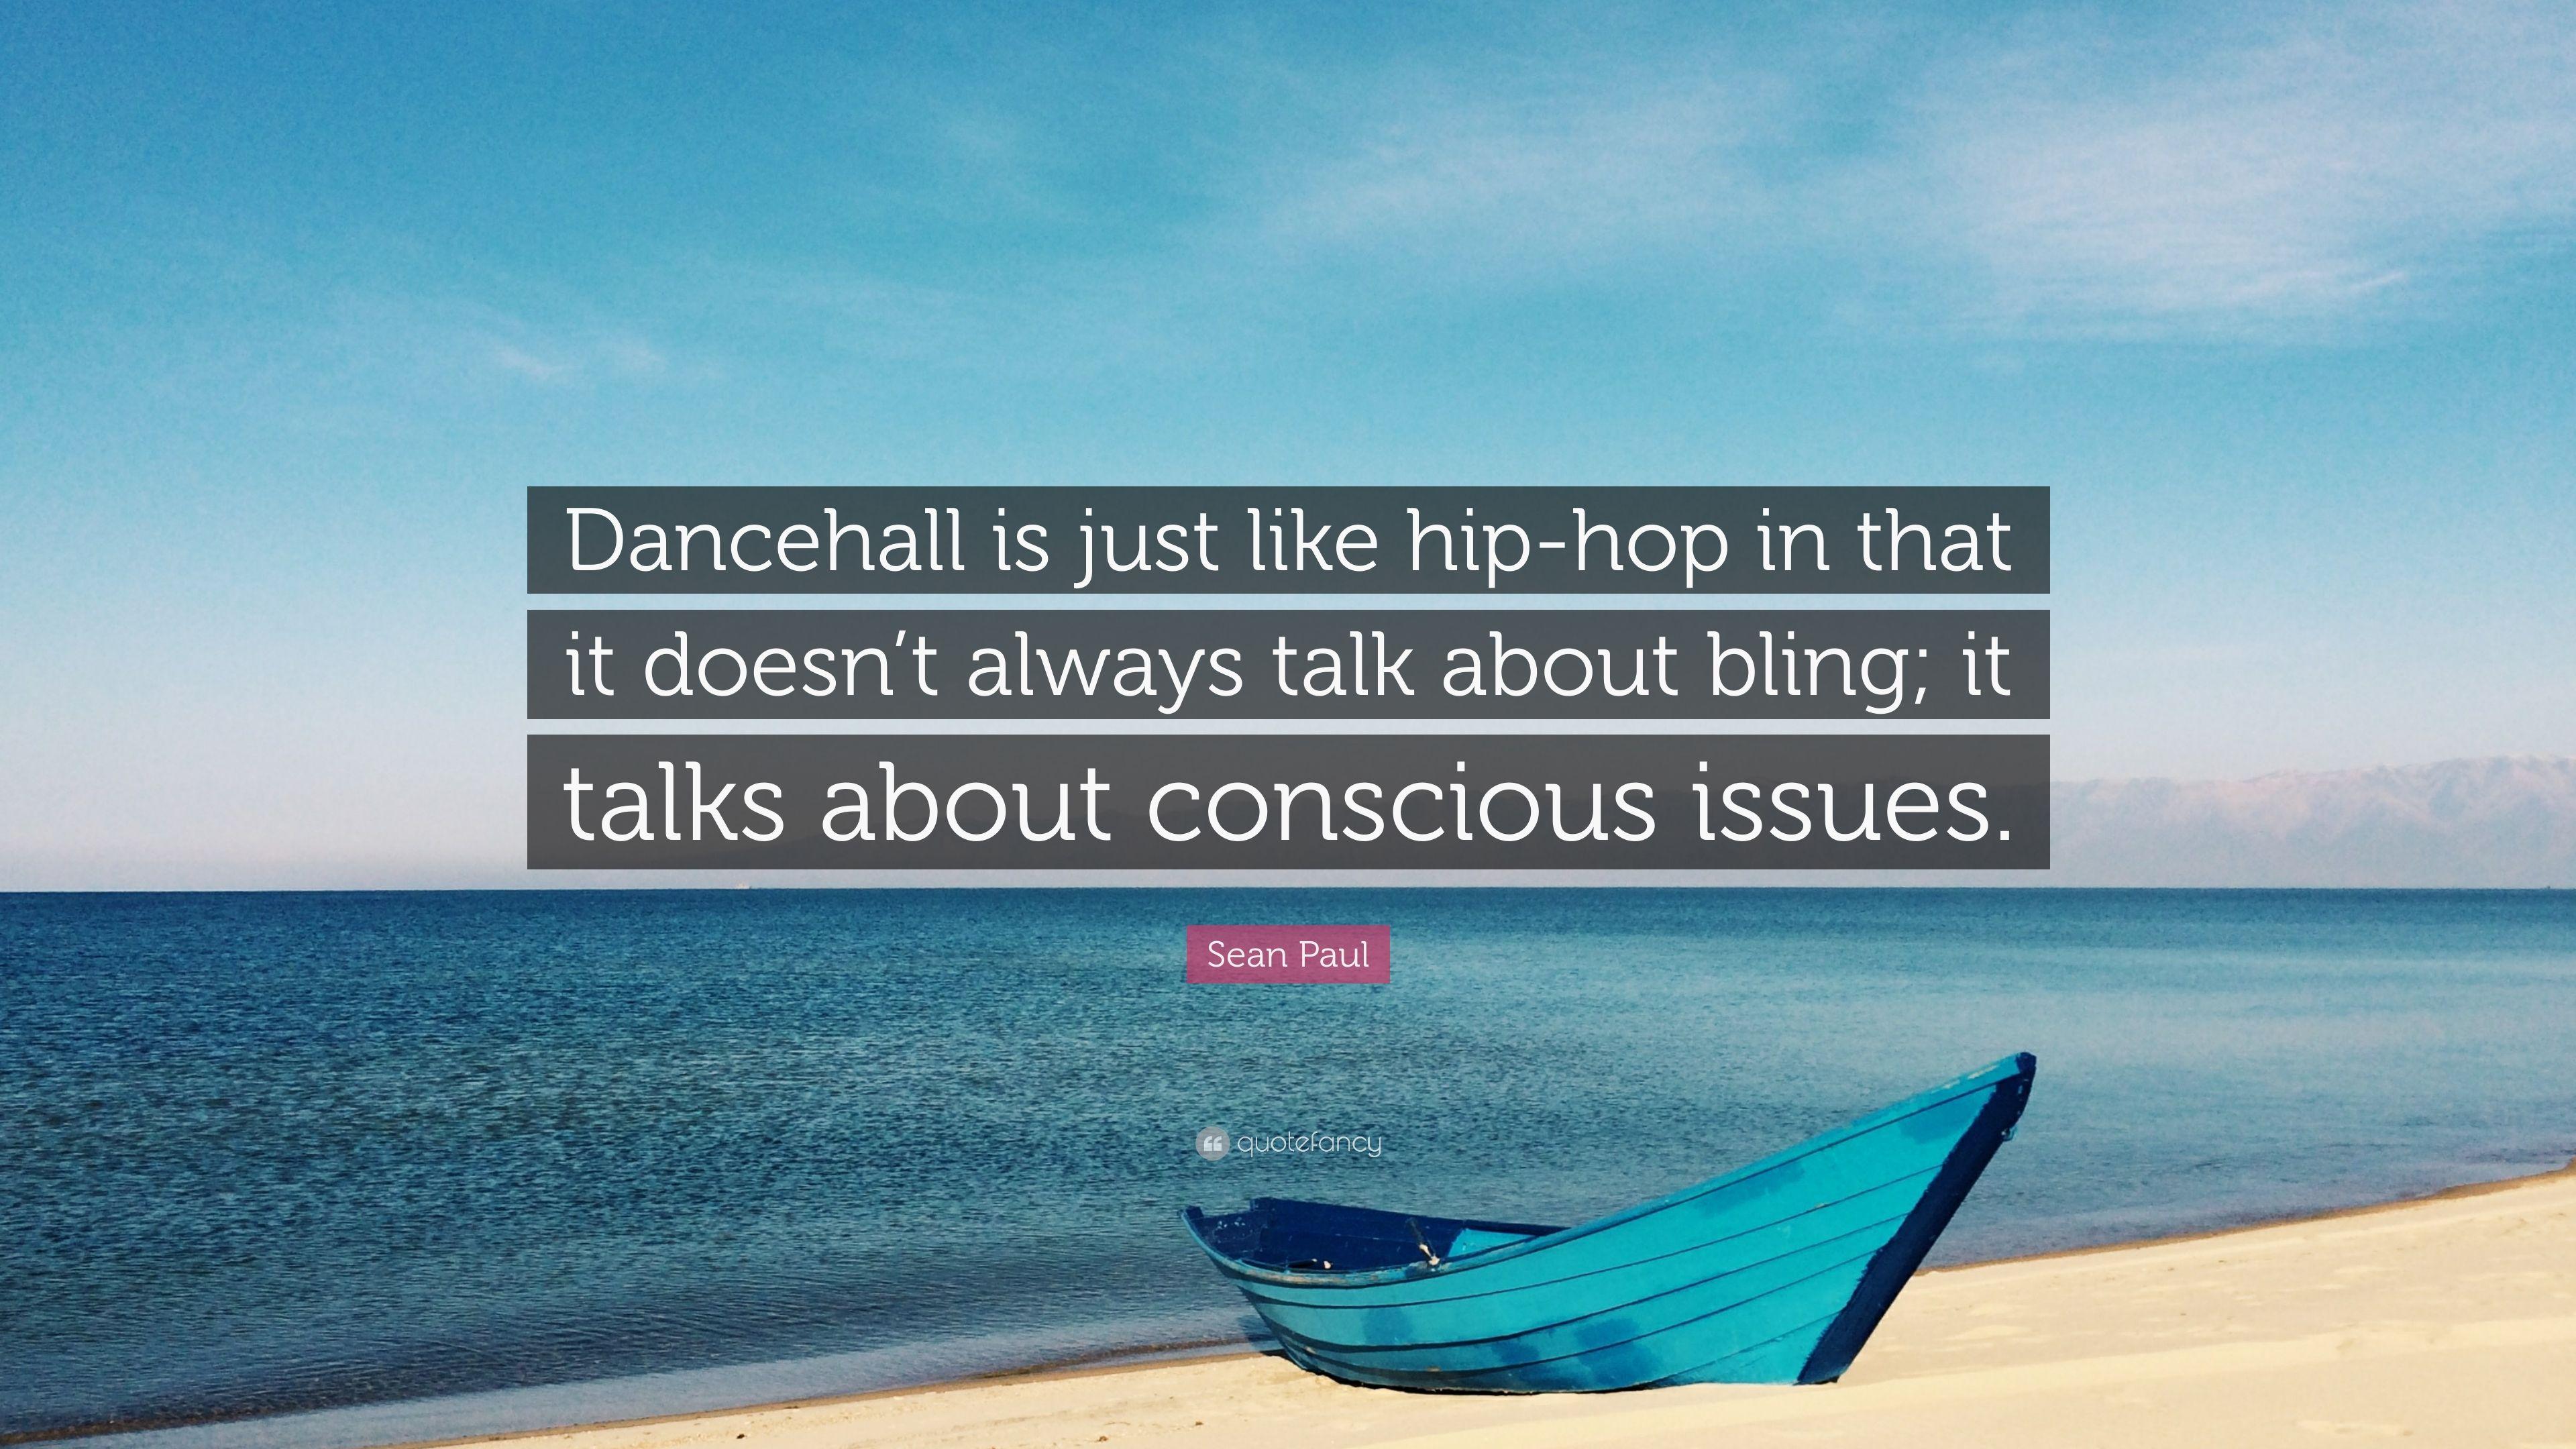 Sean Paul Quote: “Dancehall Is Just Like Hip Hop In That It Doesn't